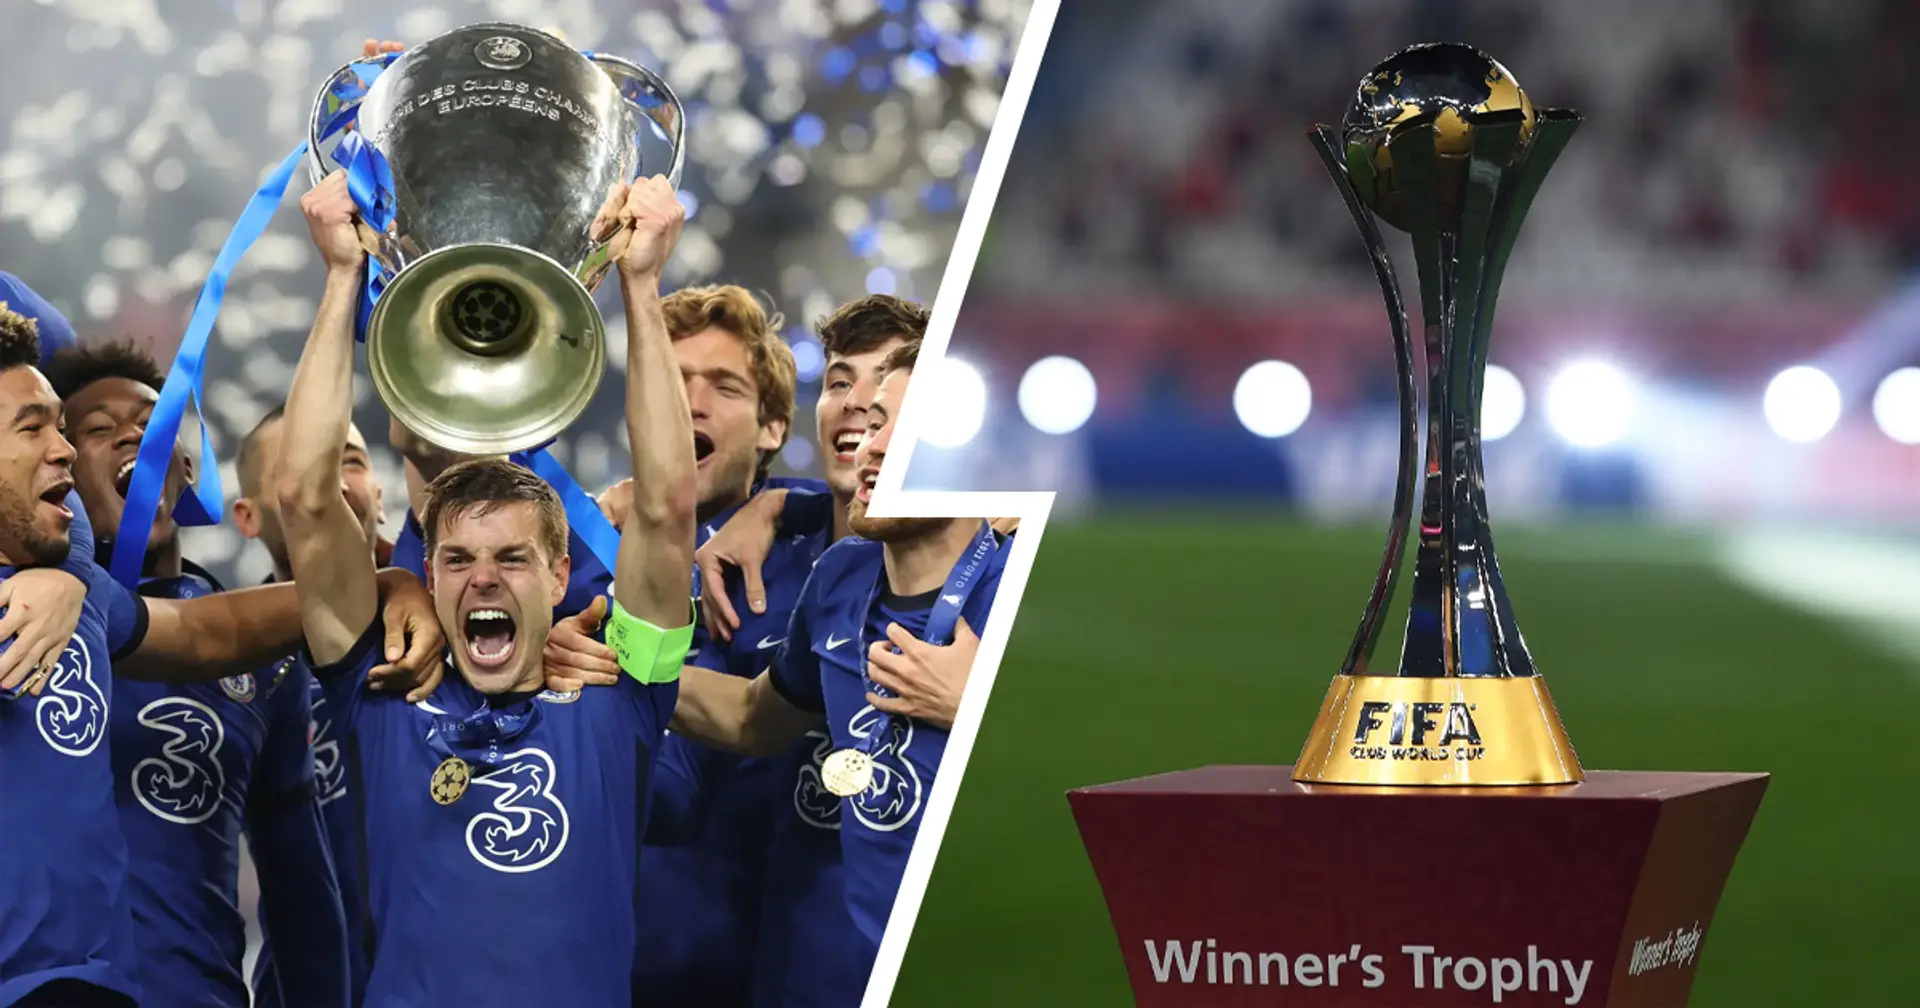 Chelsea might see Club World Cup moved to 2022 as FIFA continues new host country search